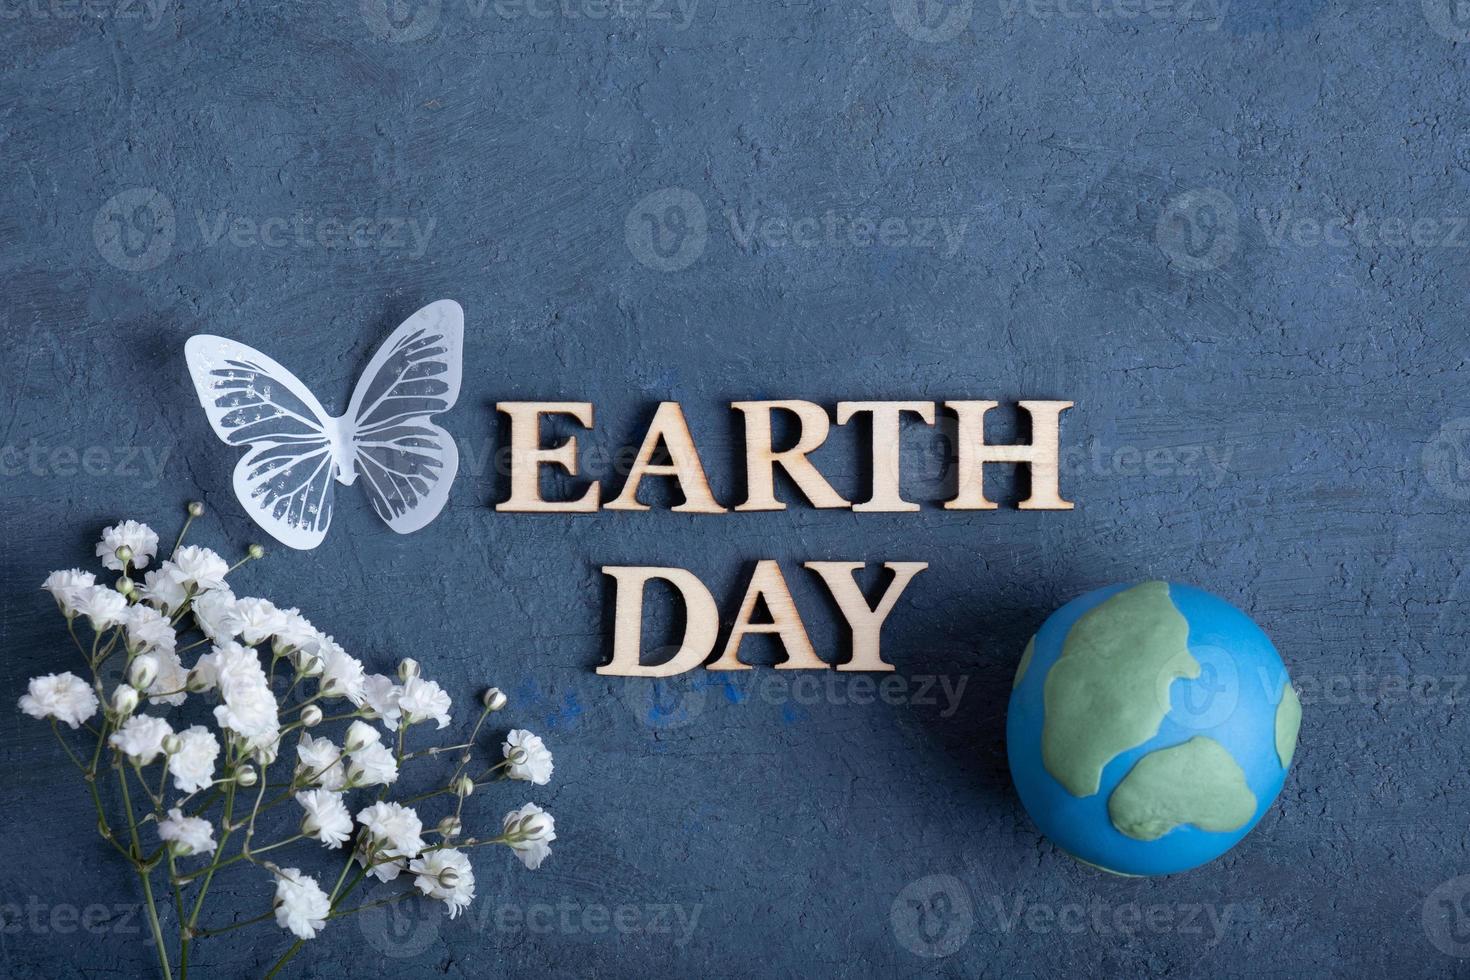 Earth day text with globe, flowers and butterfly. Happy Earth day concept flat lay, top view photo